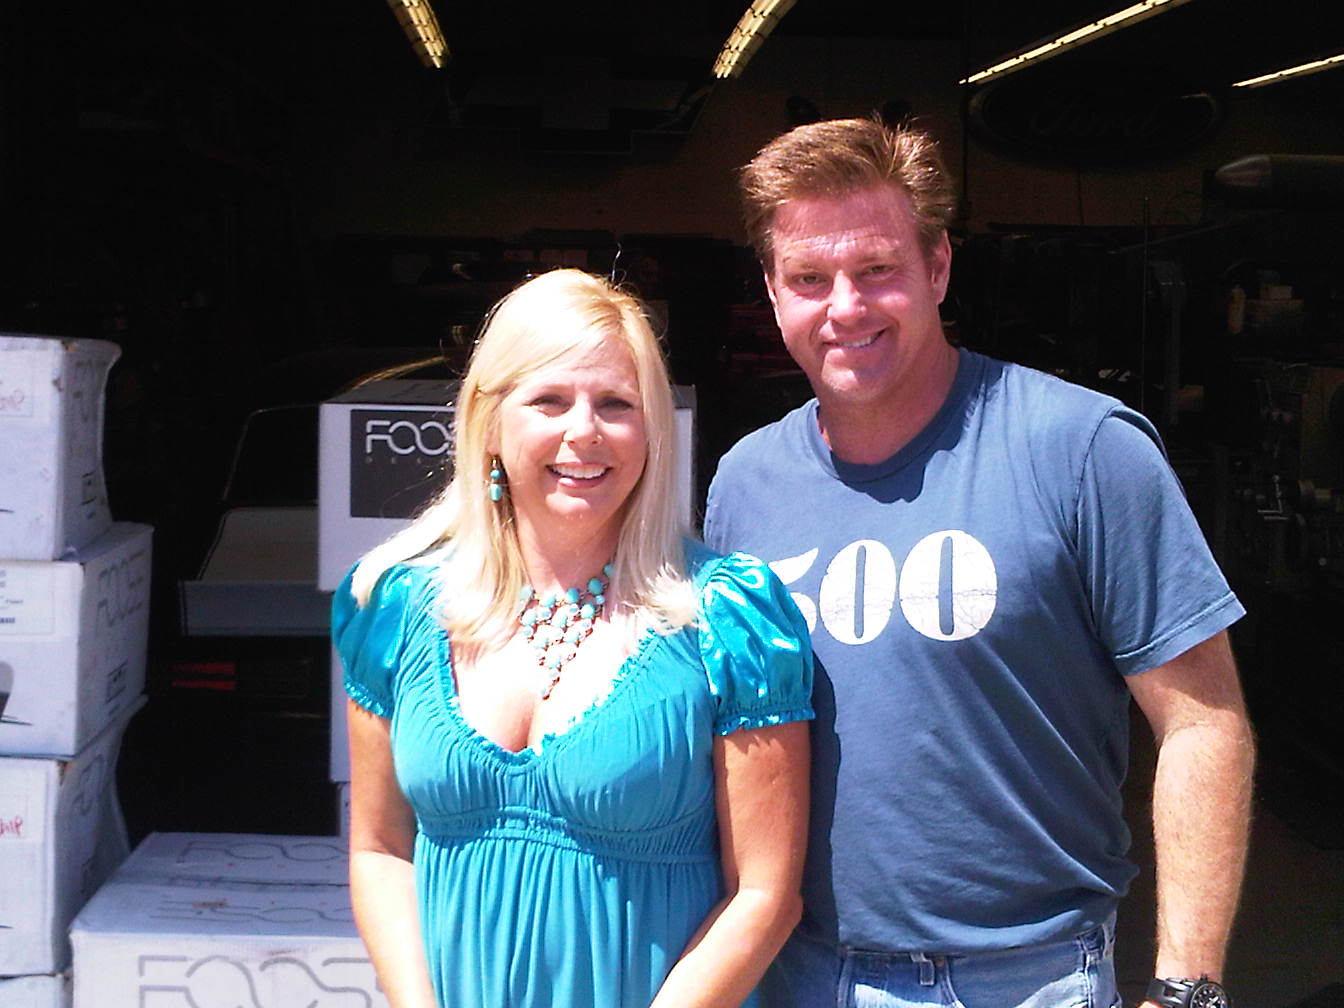 Patty and Chip Foose